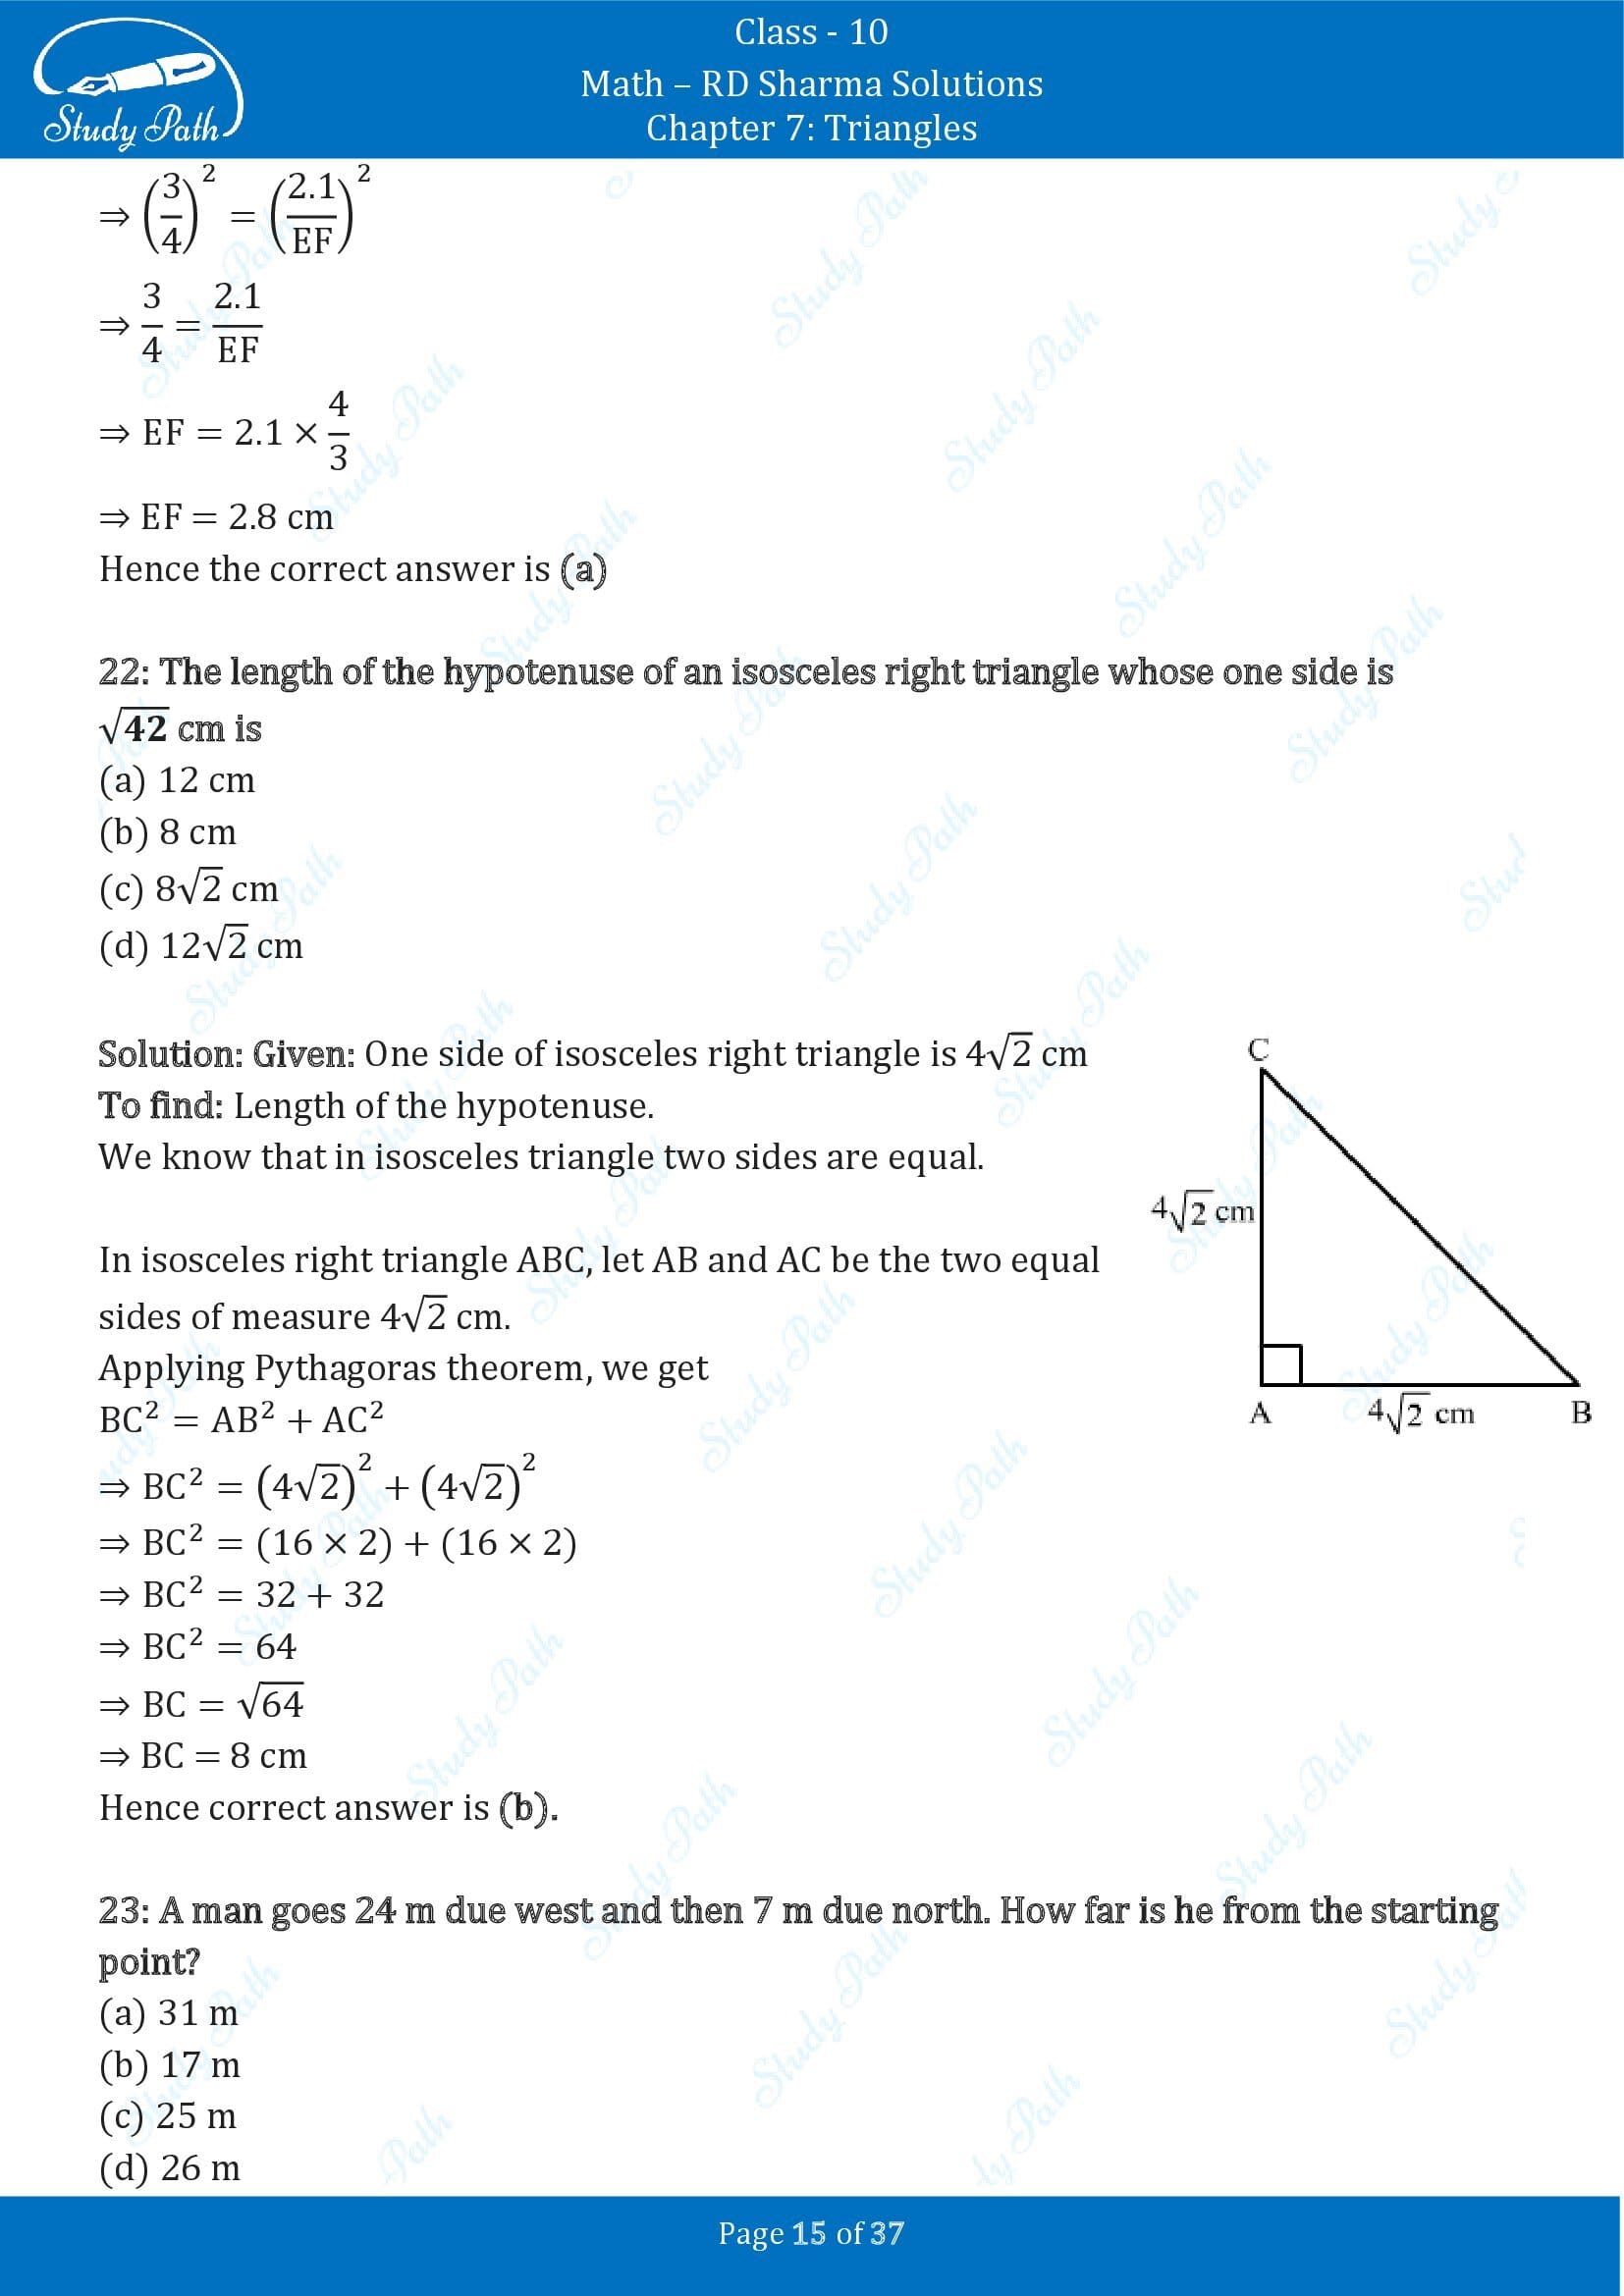 RD Sharma Solutions Class 10 Chapter 7 Triangles Multiple Choice Question MCQs 00015